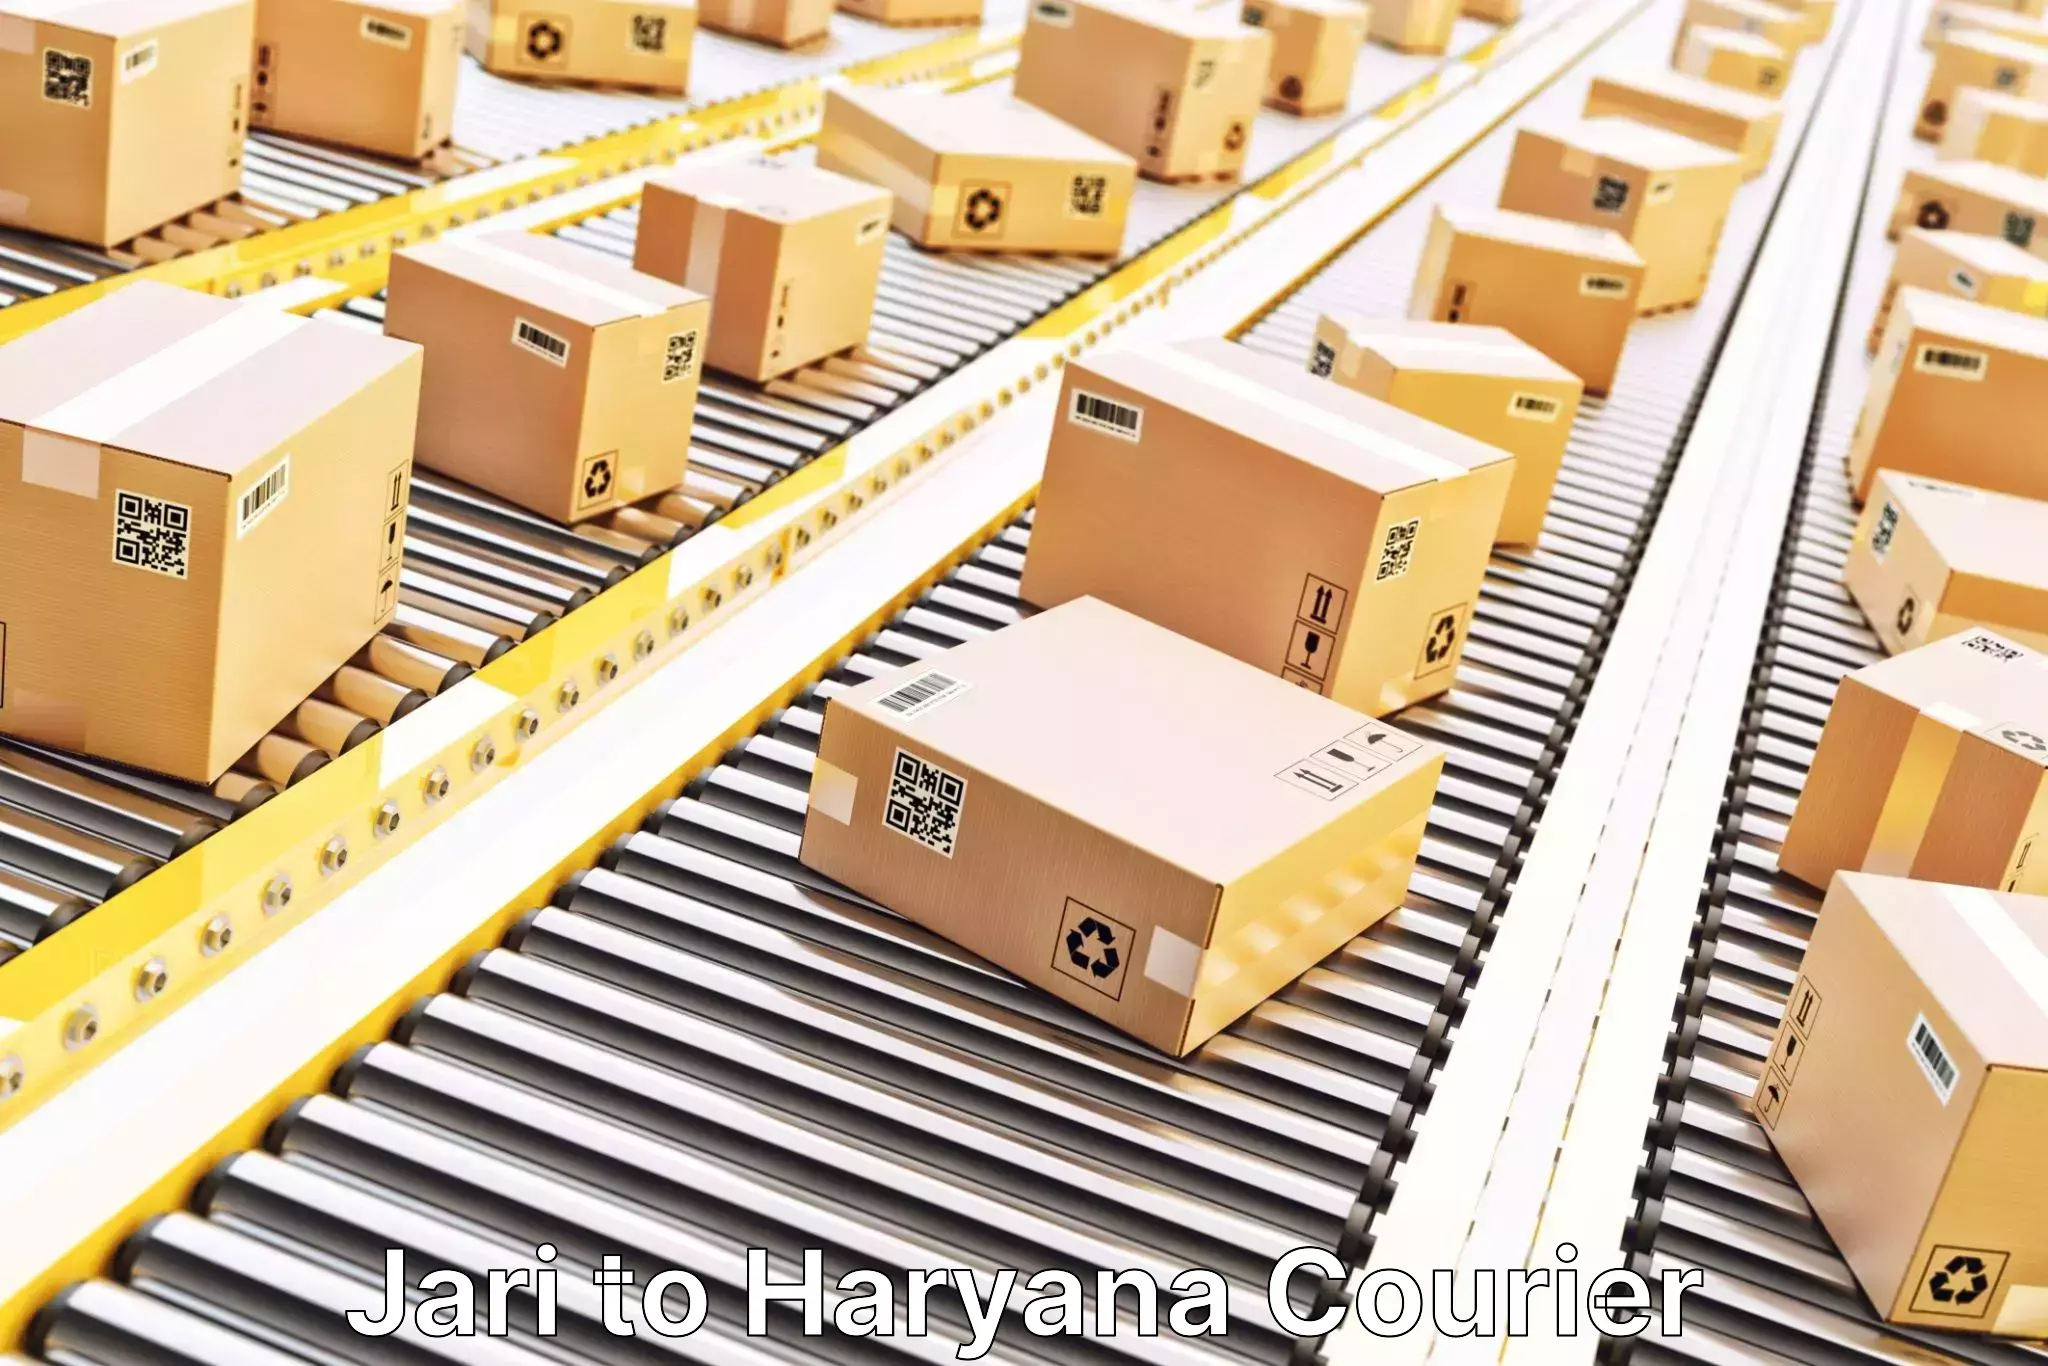 Efficient courier operations Jari to Haryana